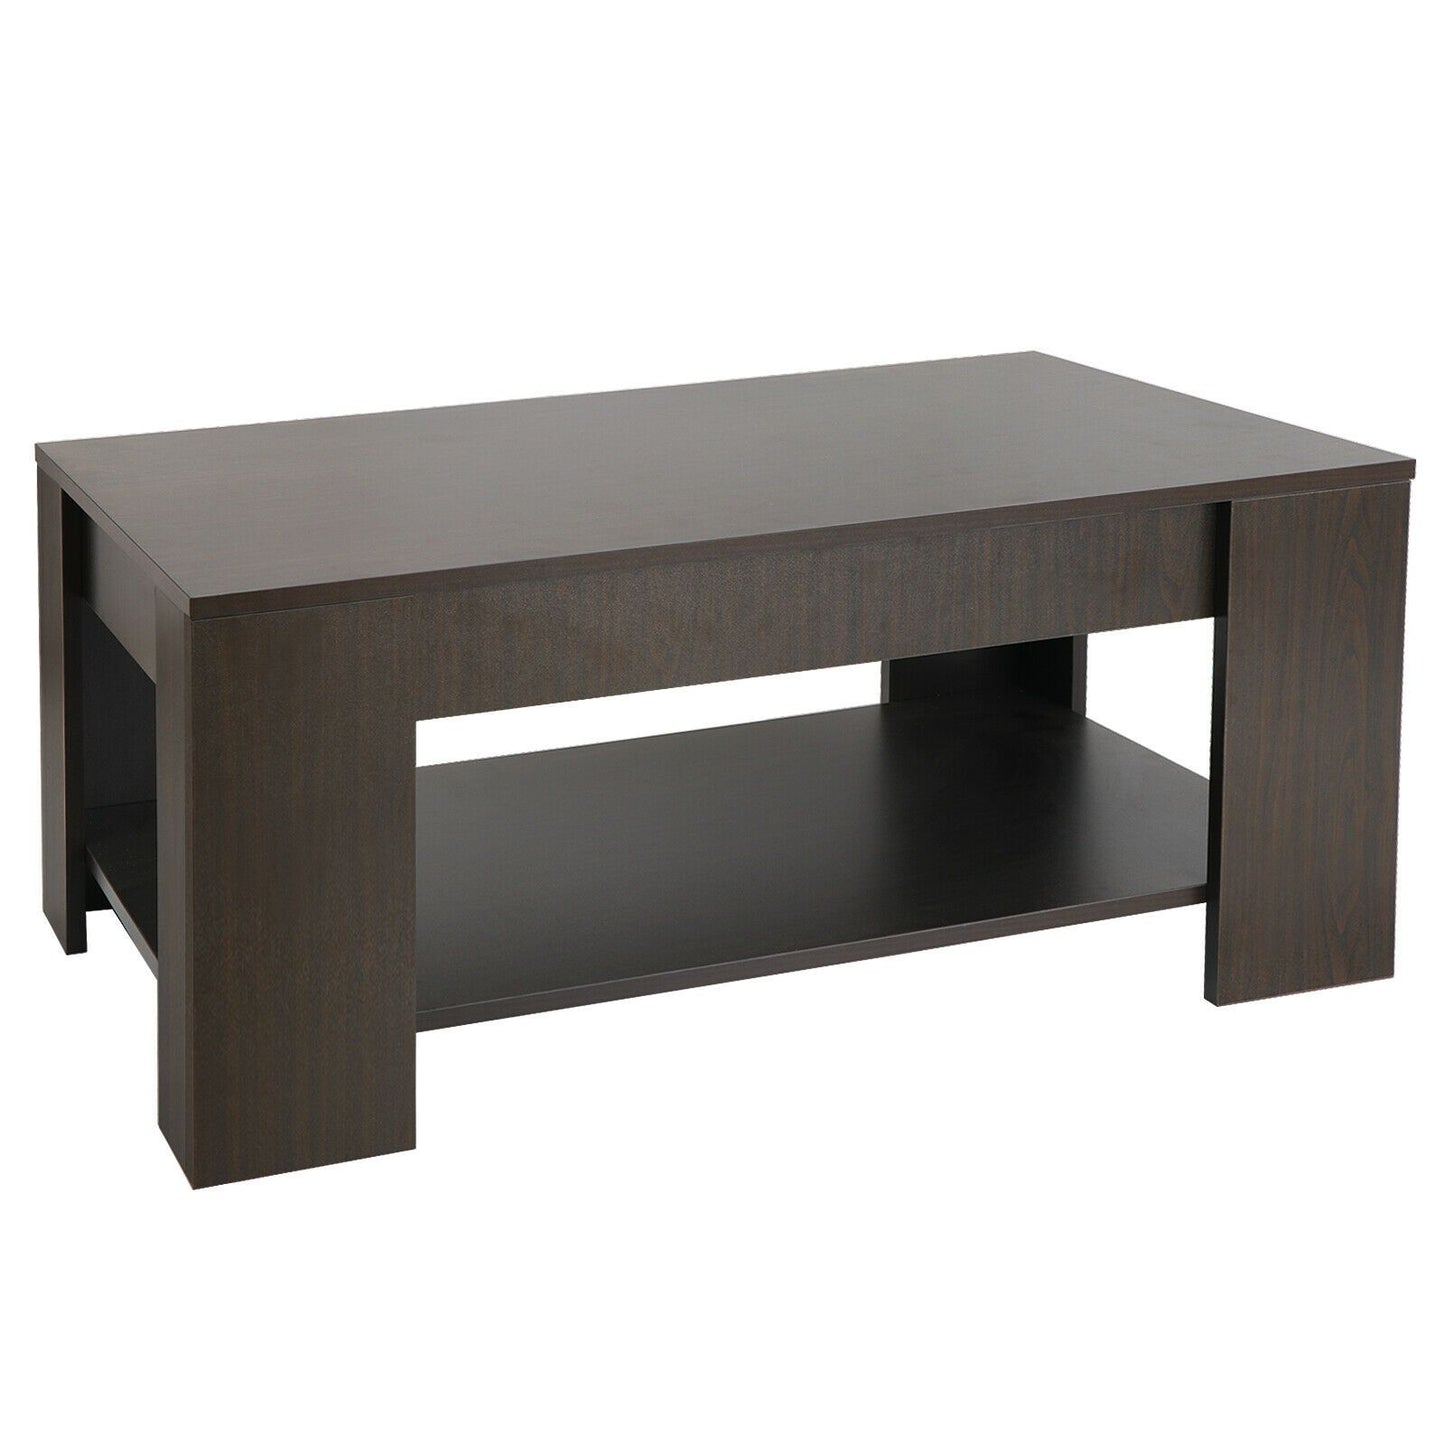 Large Wooden Solid Pop Up Lifting Top Storage Coffee Table - Westfield Retailers